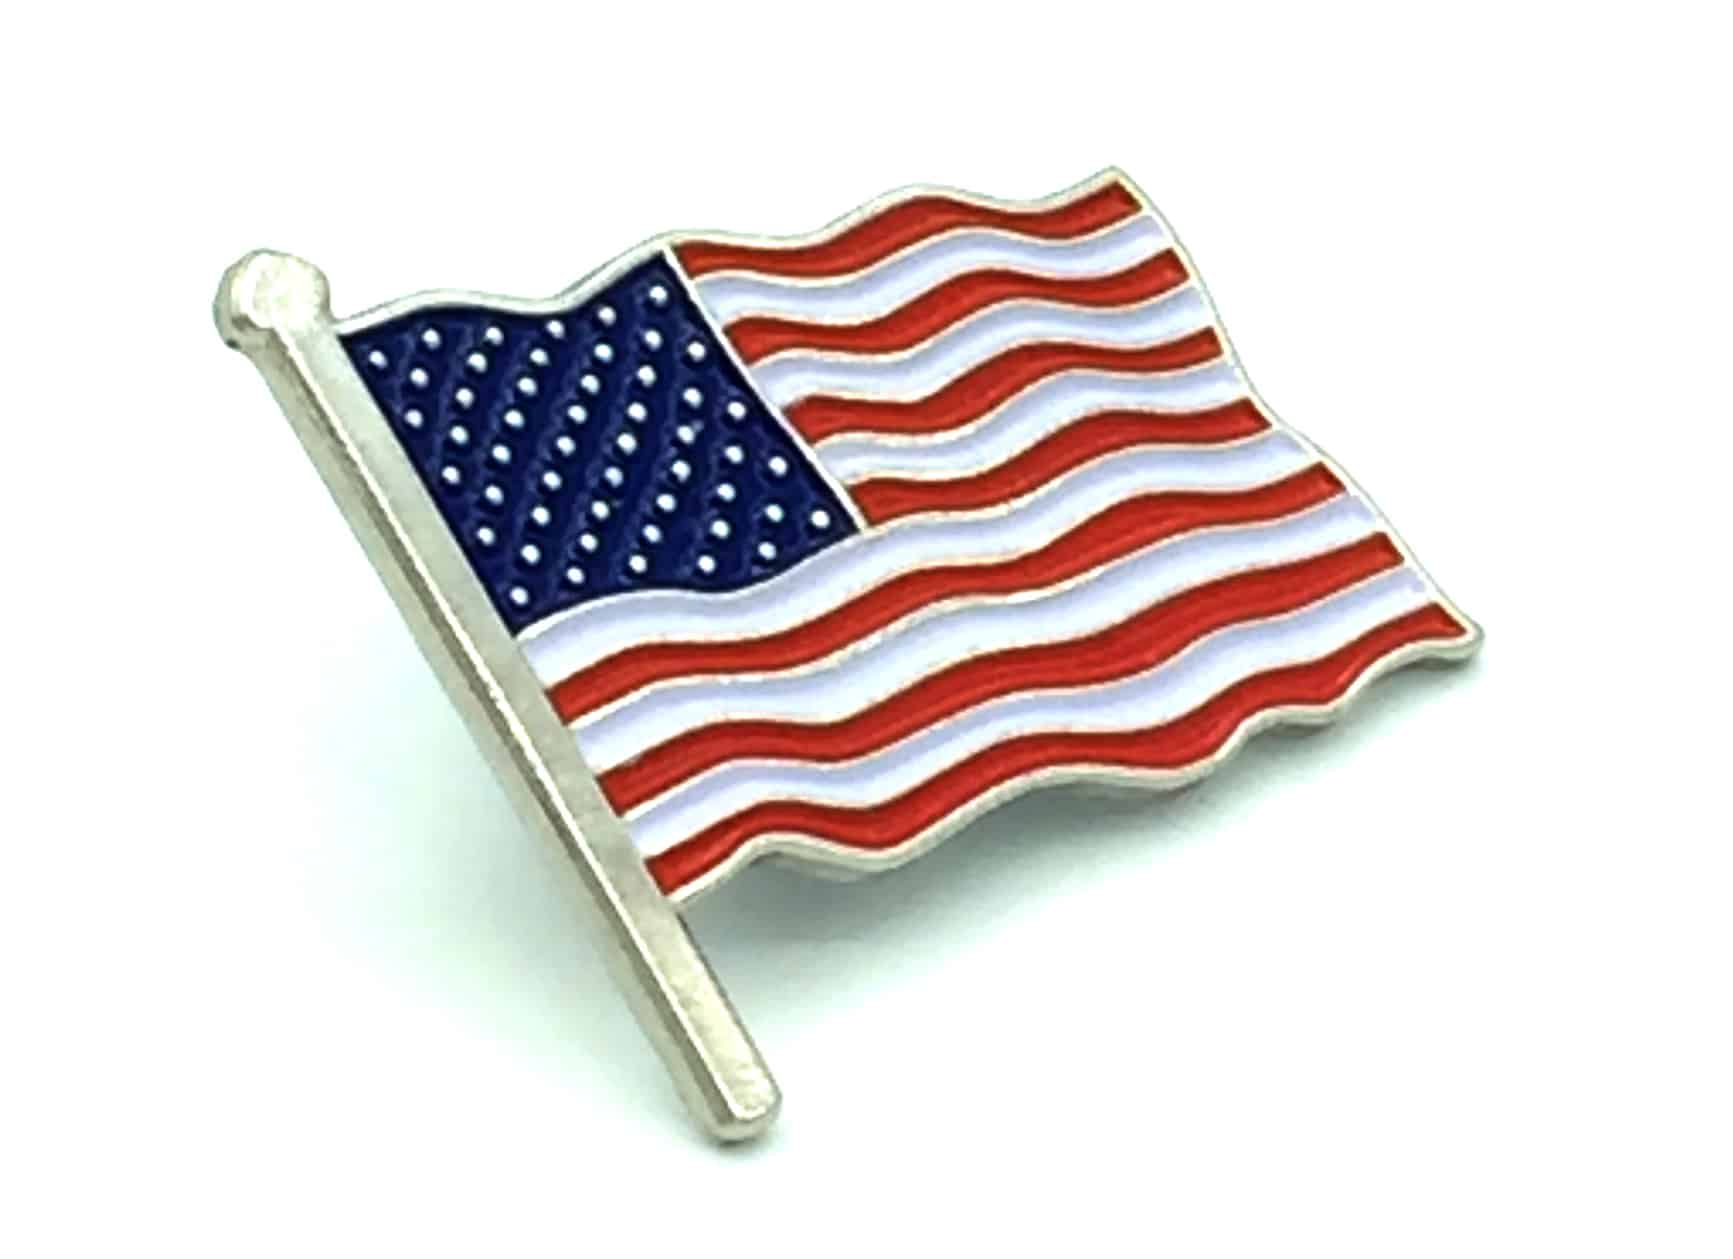 NEW Lot of 3 American Flag Enamel 1" Lapel Pins United States USA VOTE 2020 Pin 